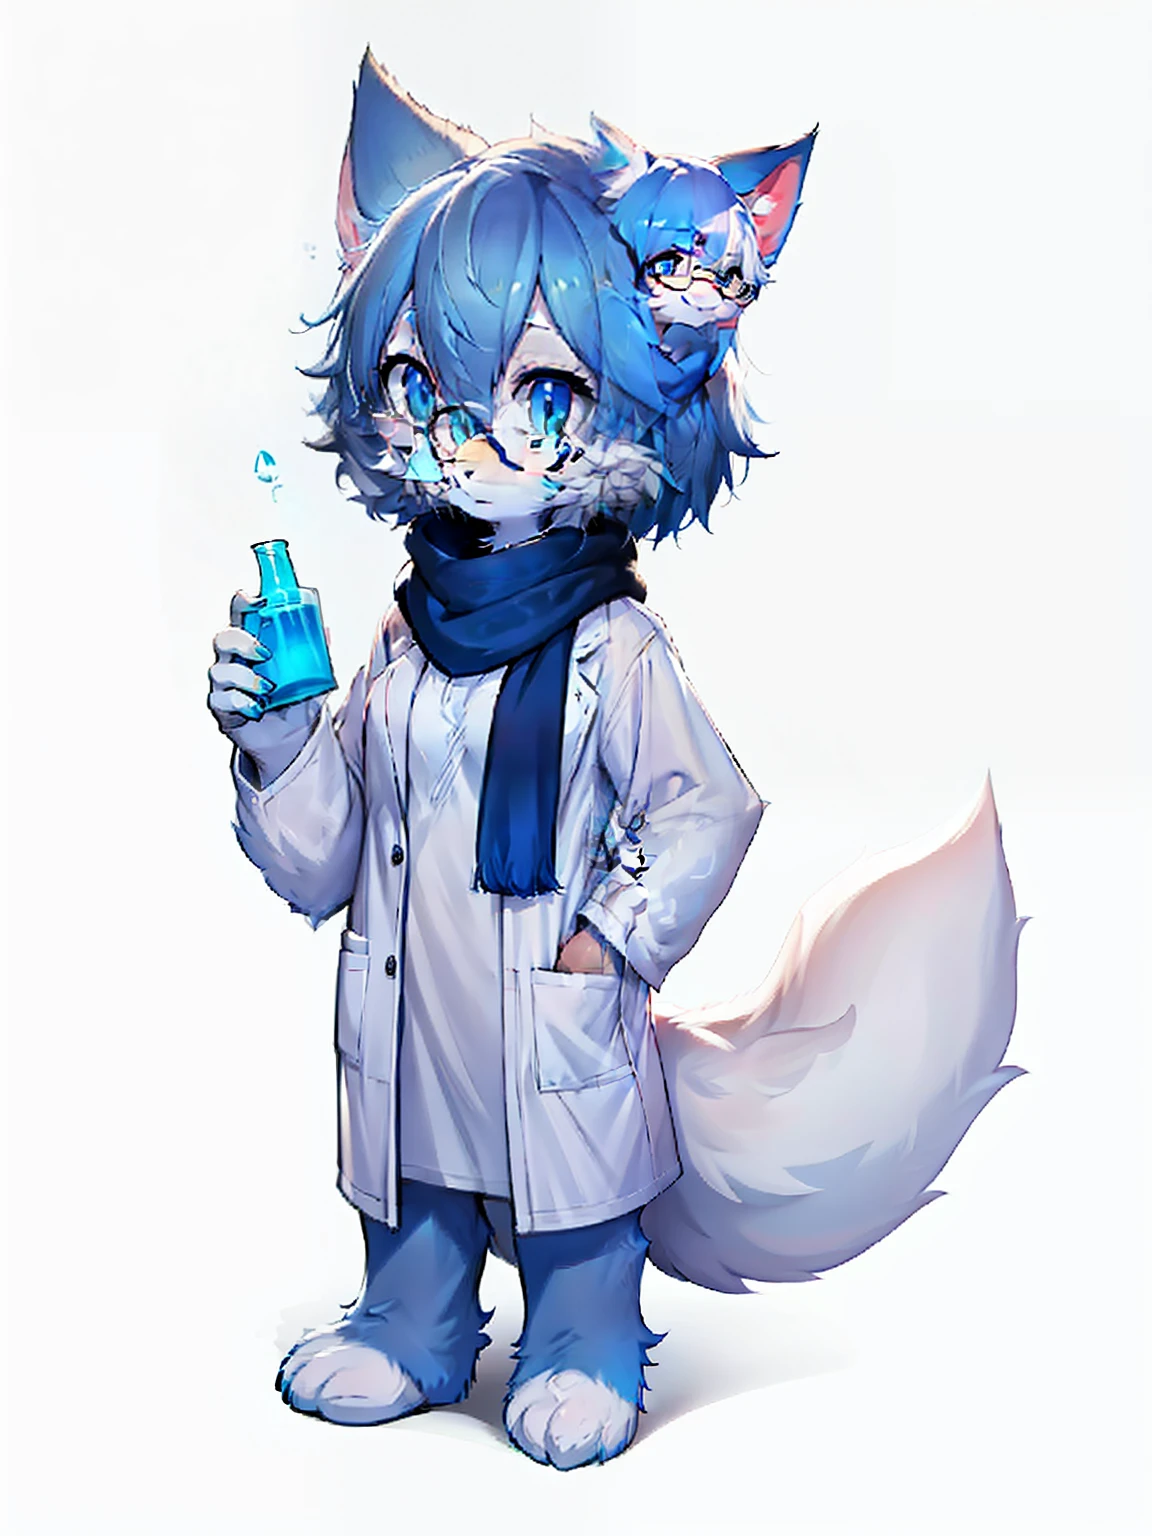 Anime character with arctic fox ears wearing lab coat and blue scarf,Arctic fox with fluffy blue fur and tail,Wear half-rimmed glasses,Arctic fox beauty in lab coat,  Fox scientist, professional furry drawing，female fursona